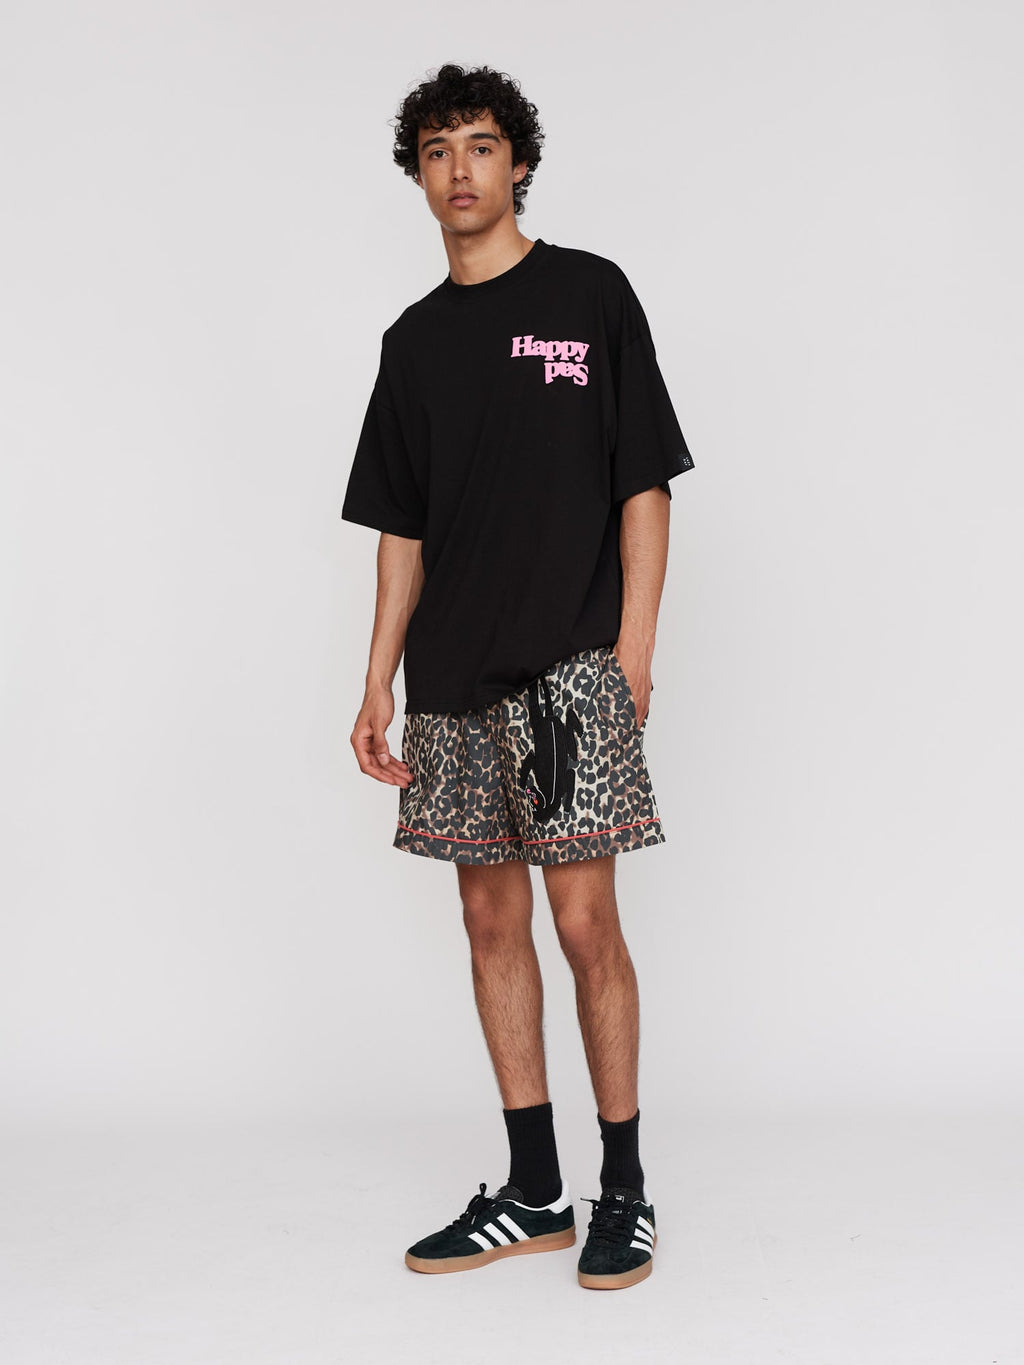 collection-men-landing, collection-men-new-in-1, collection-men-trousers, collection-festival-mens, collection-men-co-ords, collection-men-shorts